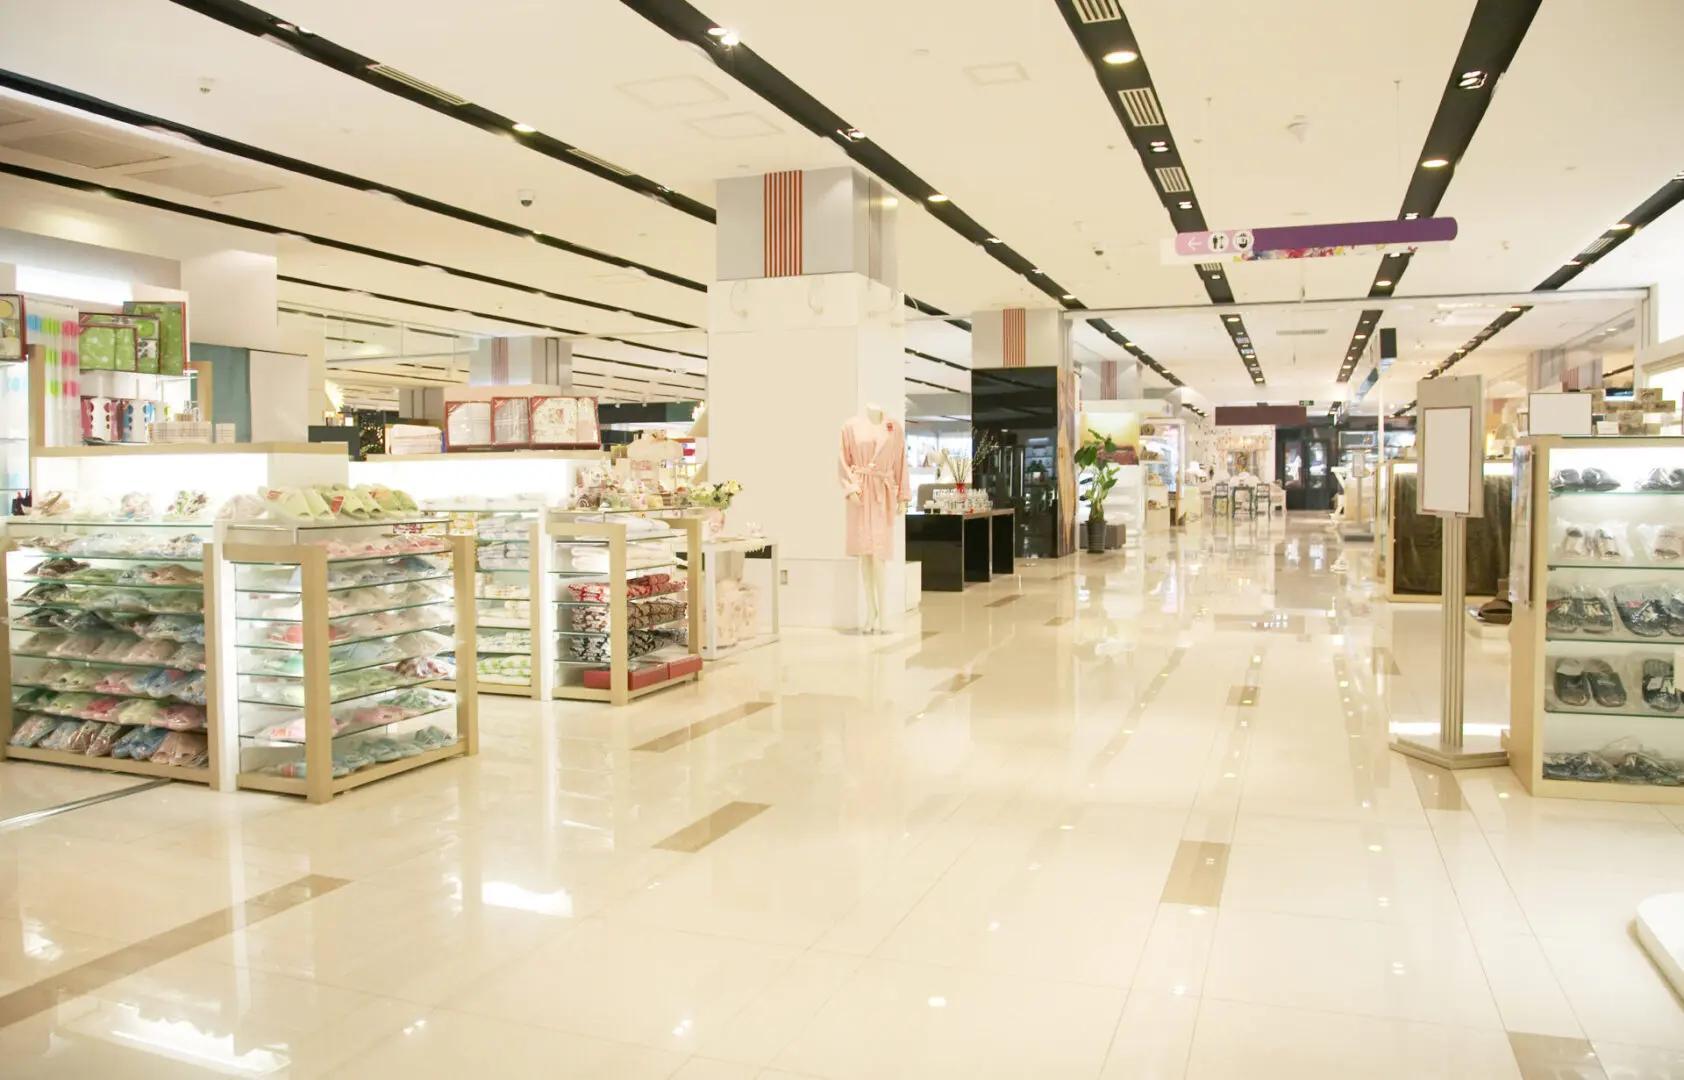 A large store with many shelves and counters.